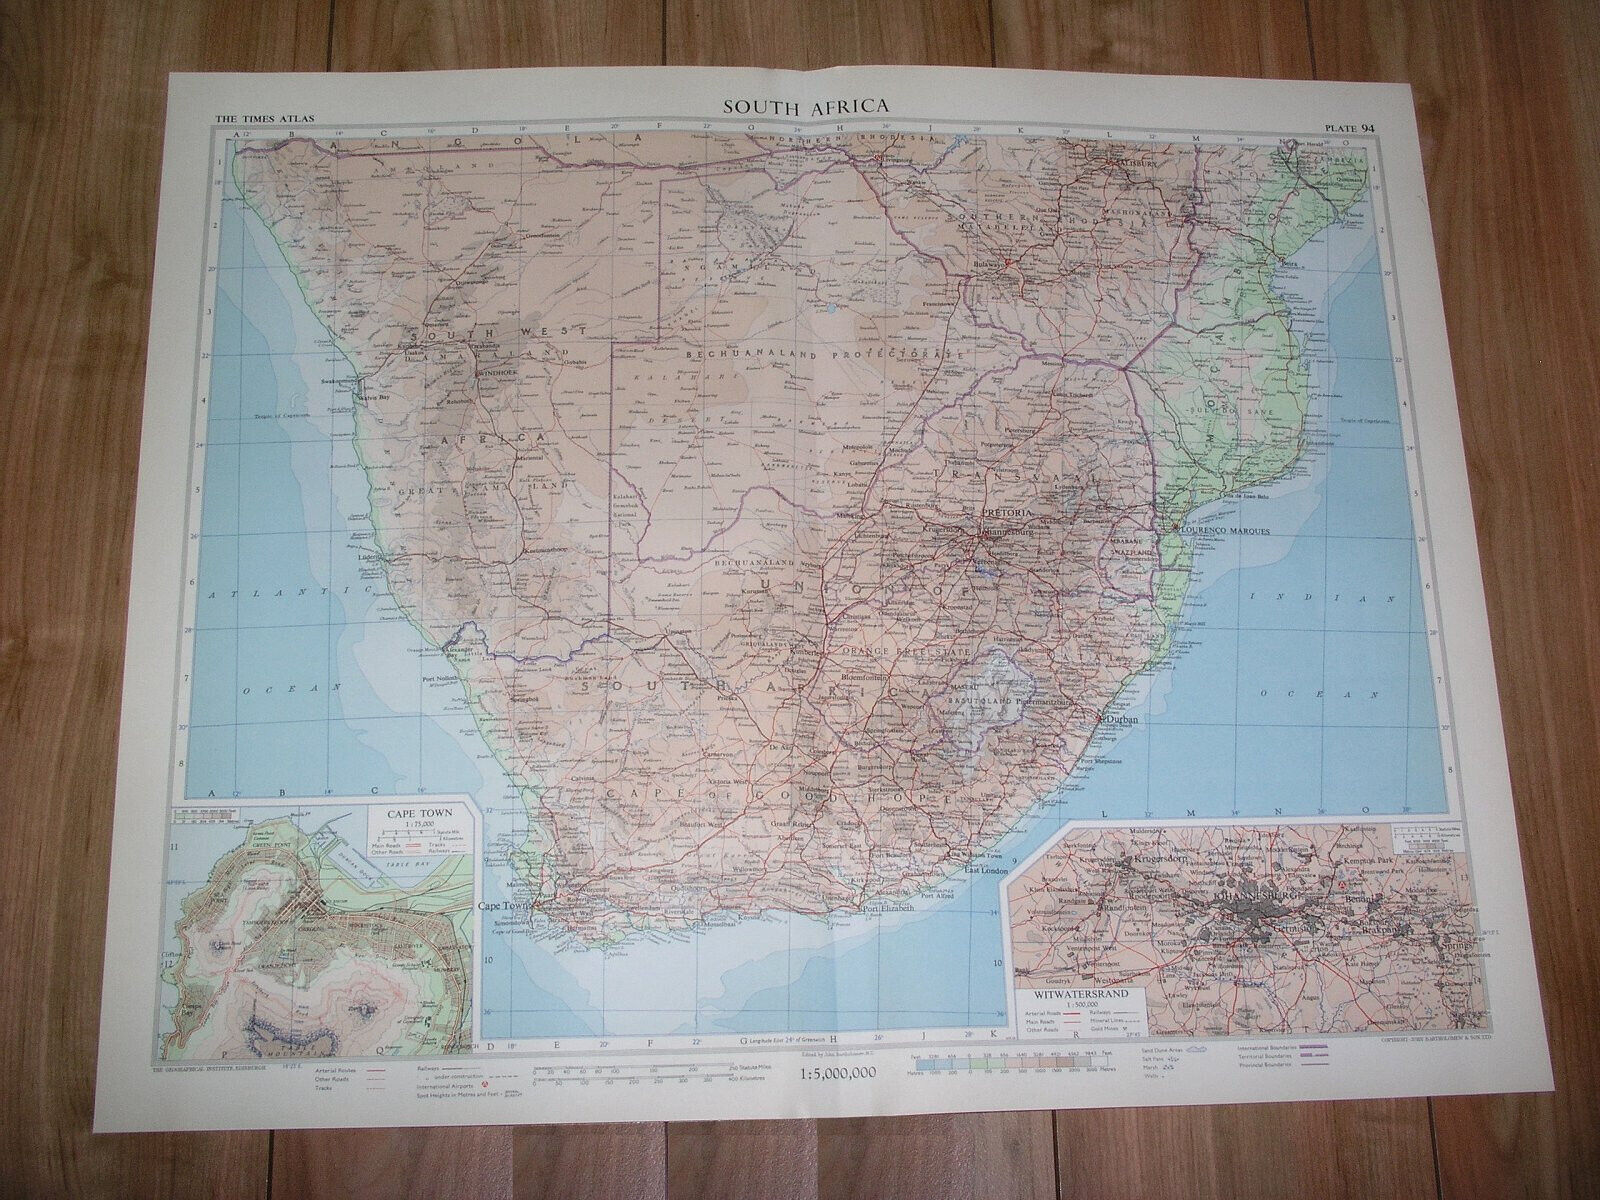 1956 VINTAGE MAP OF SOUTH AFRICA CAPE TOWN JOHANNESBURG NAMIBIA RHODESIA